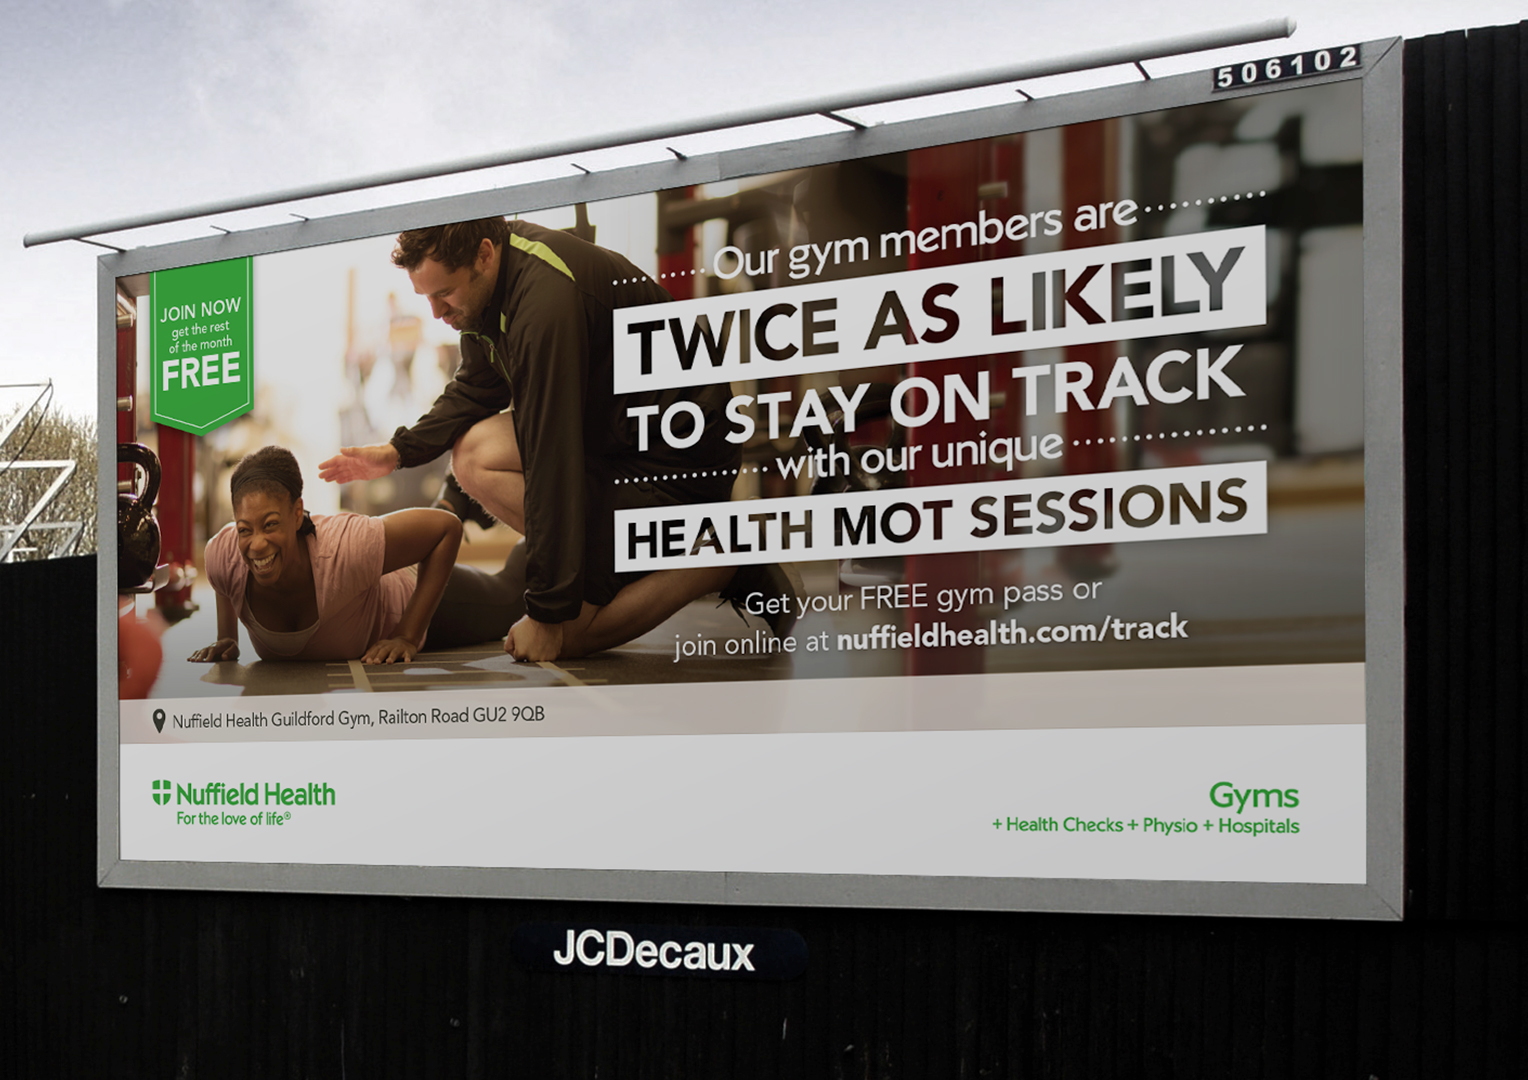 Nuffield Health. 48 Sheet National Advertising Campaign. Creative artwork and graphic design.